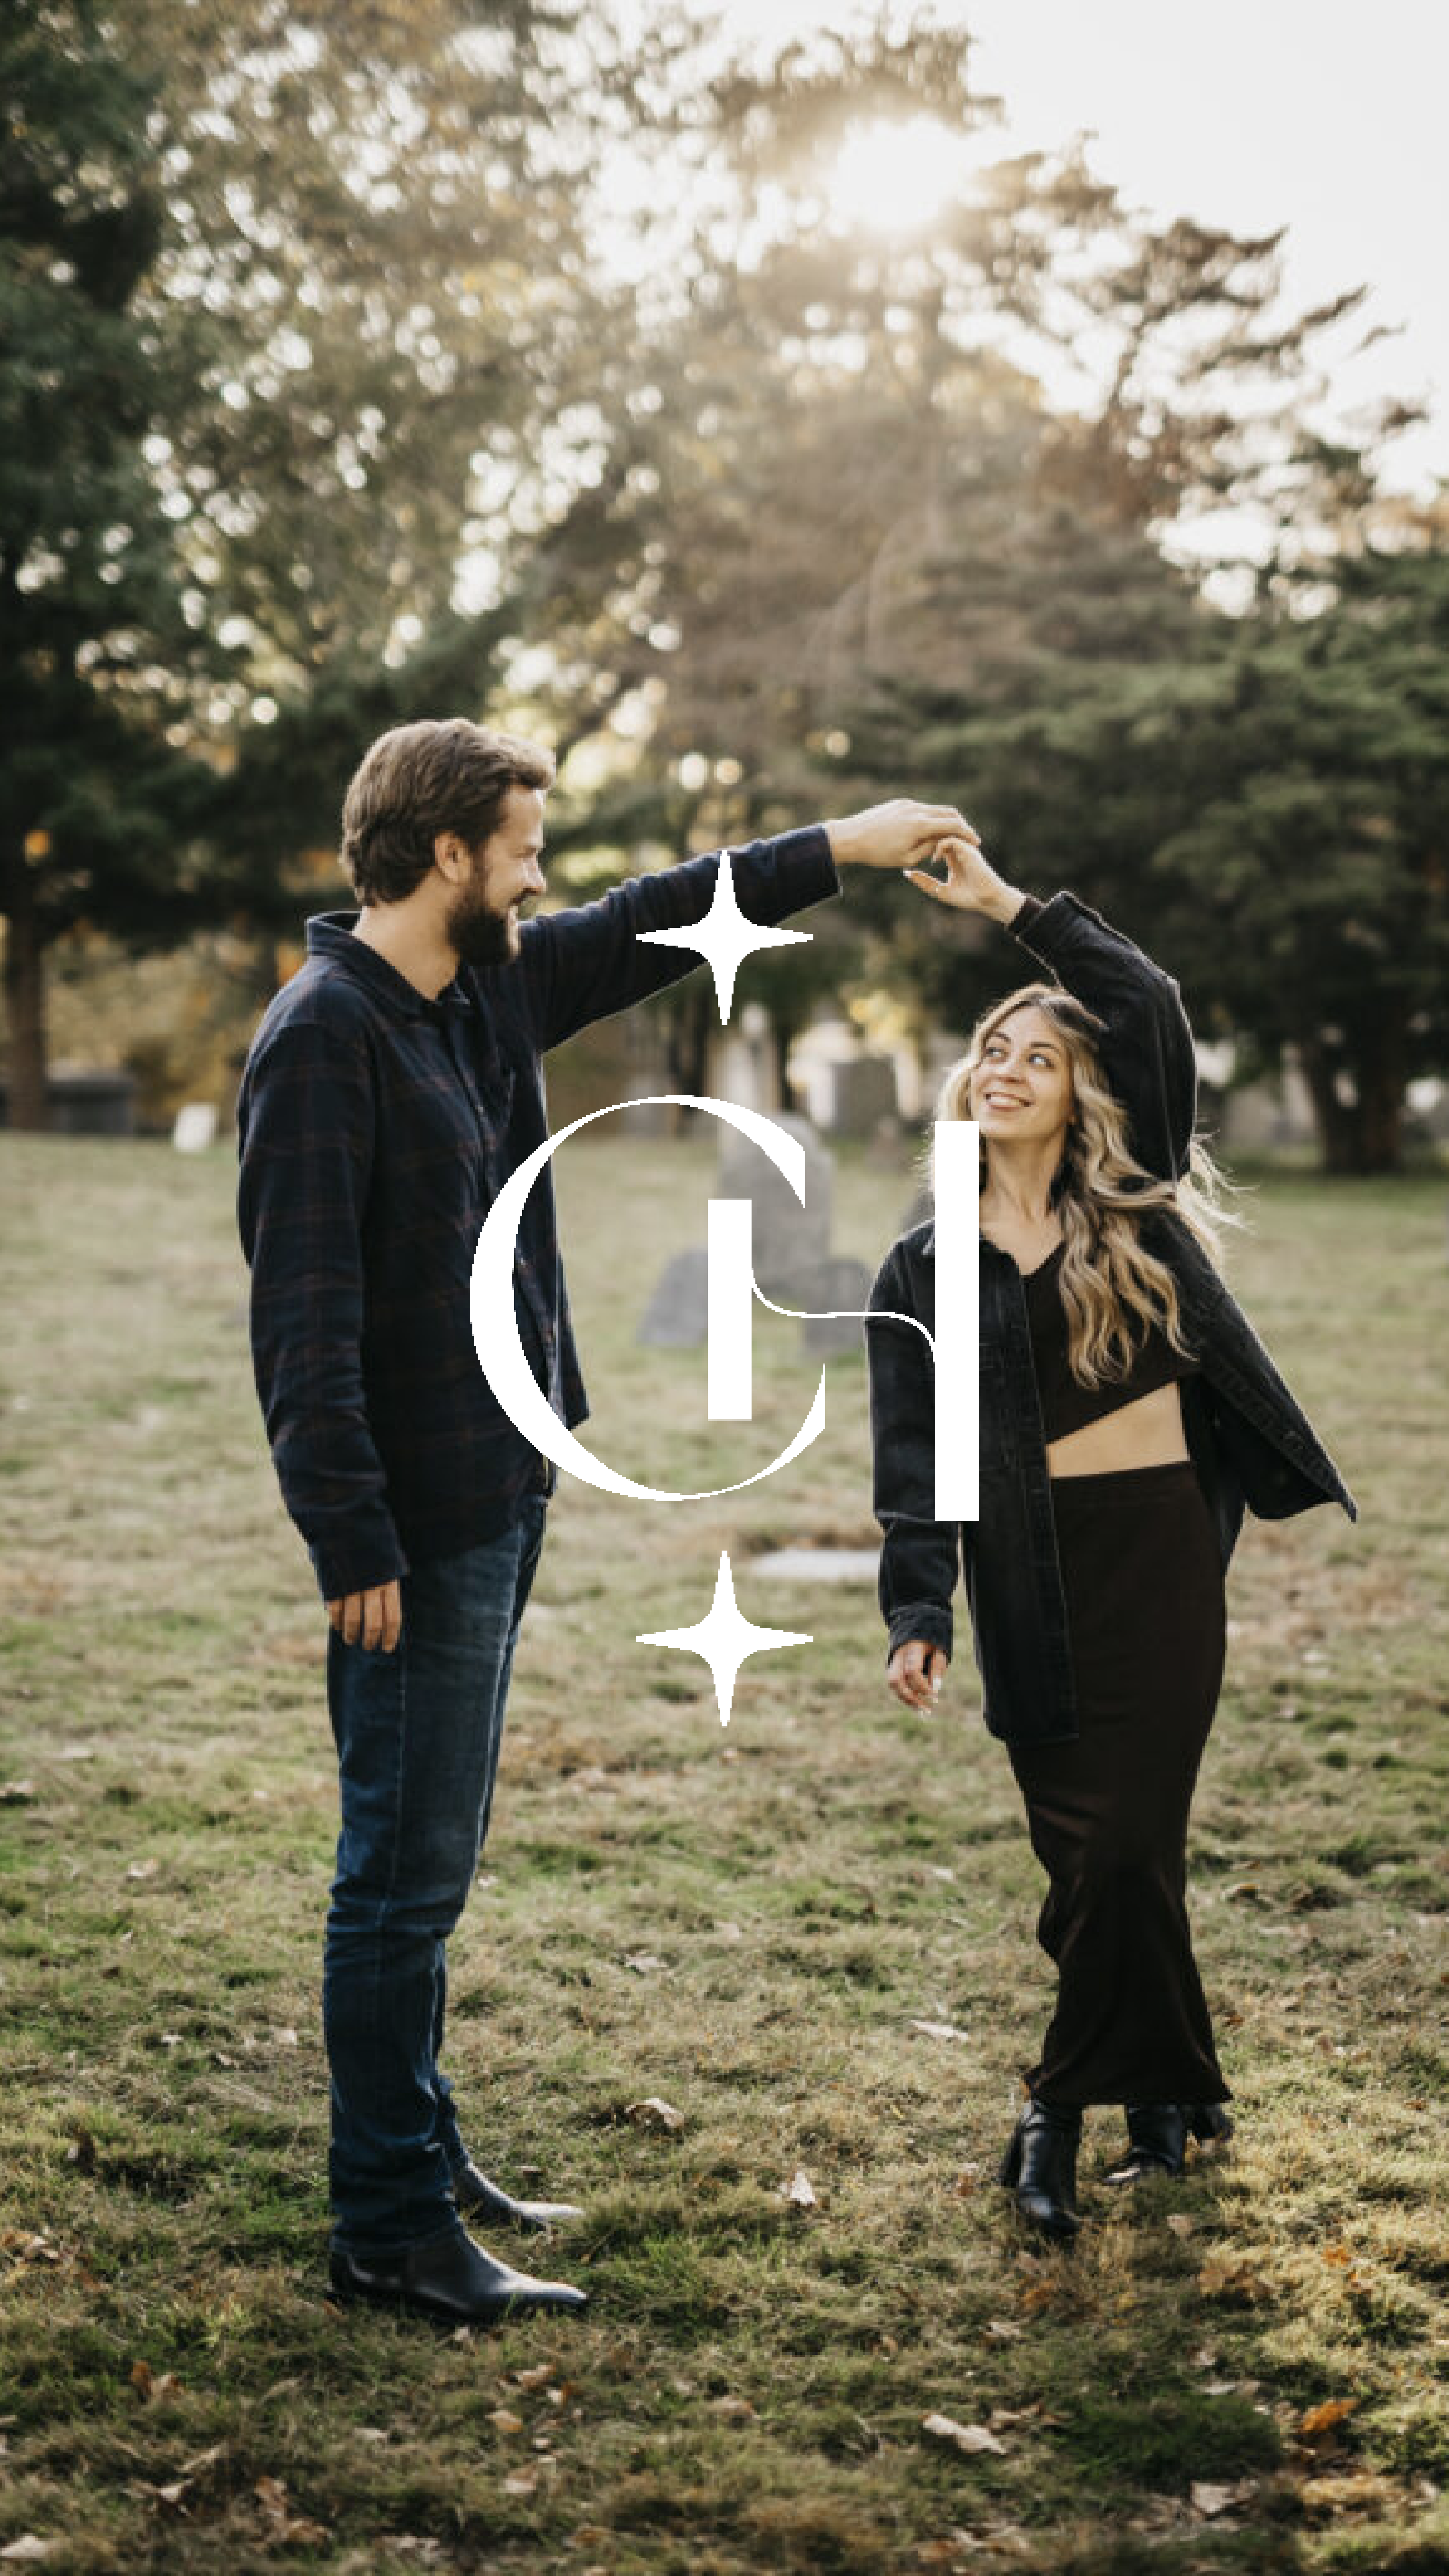 A couple dancing with a monogram logo overlaid